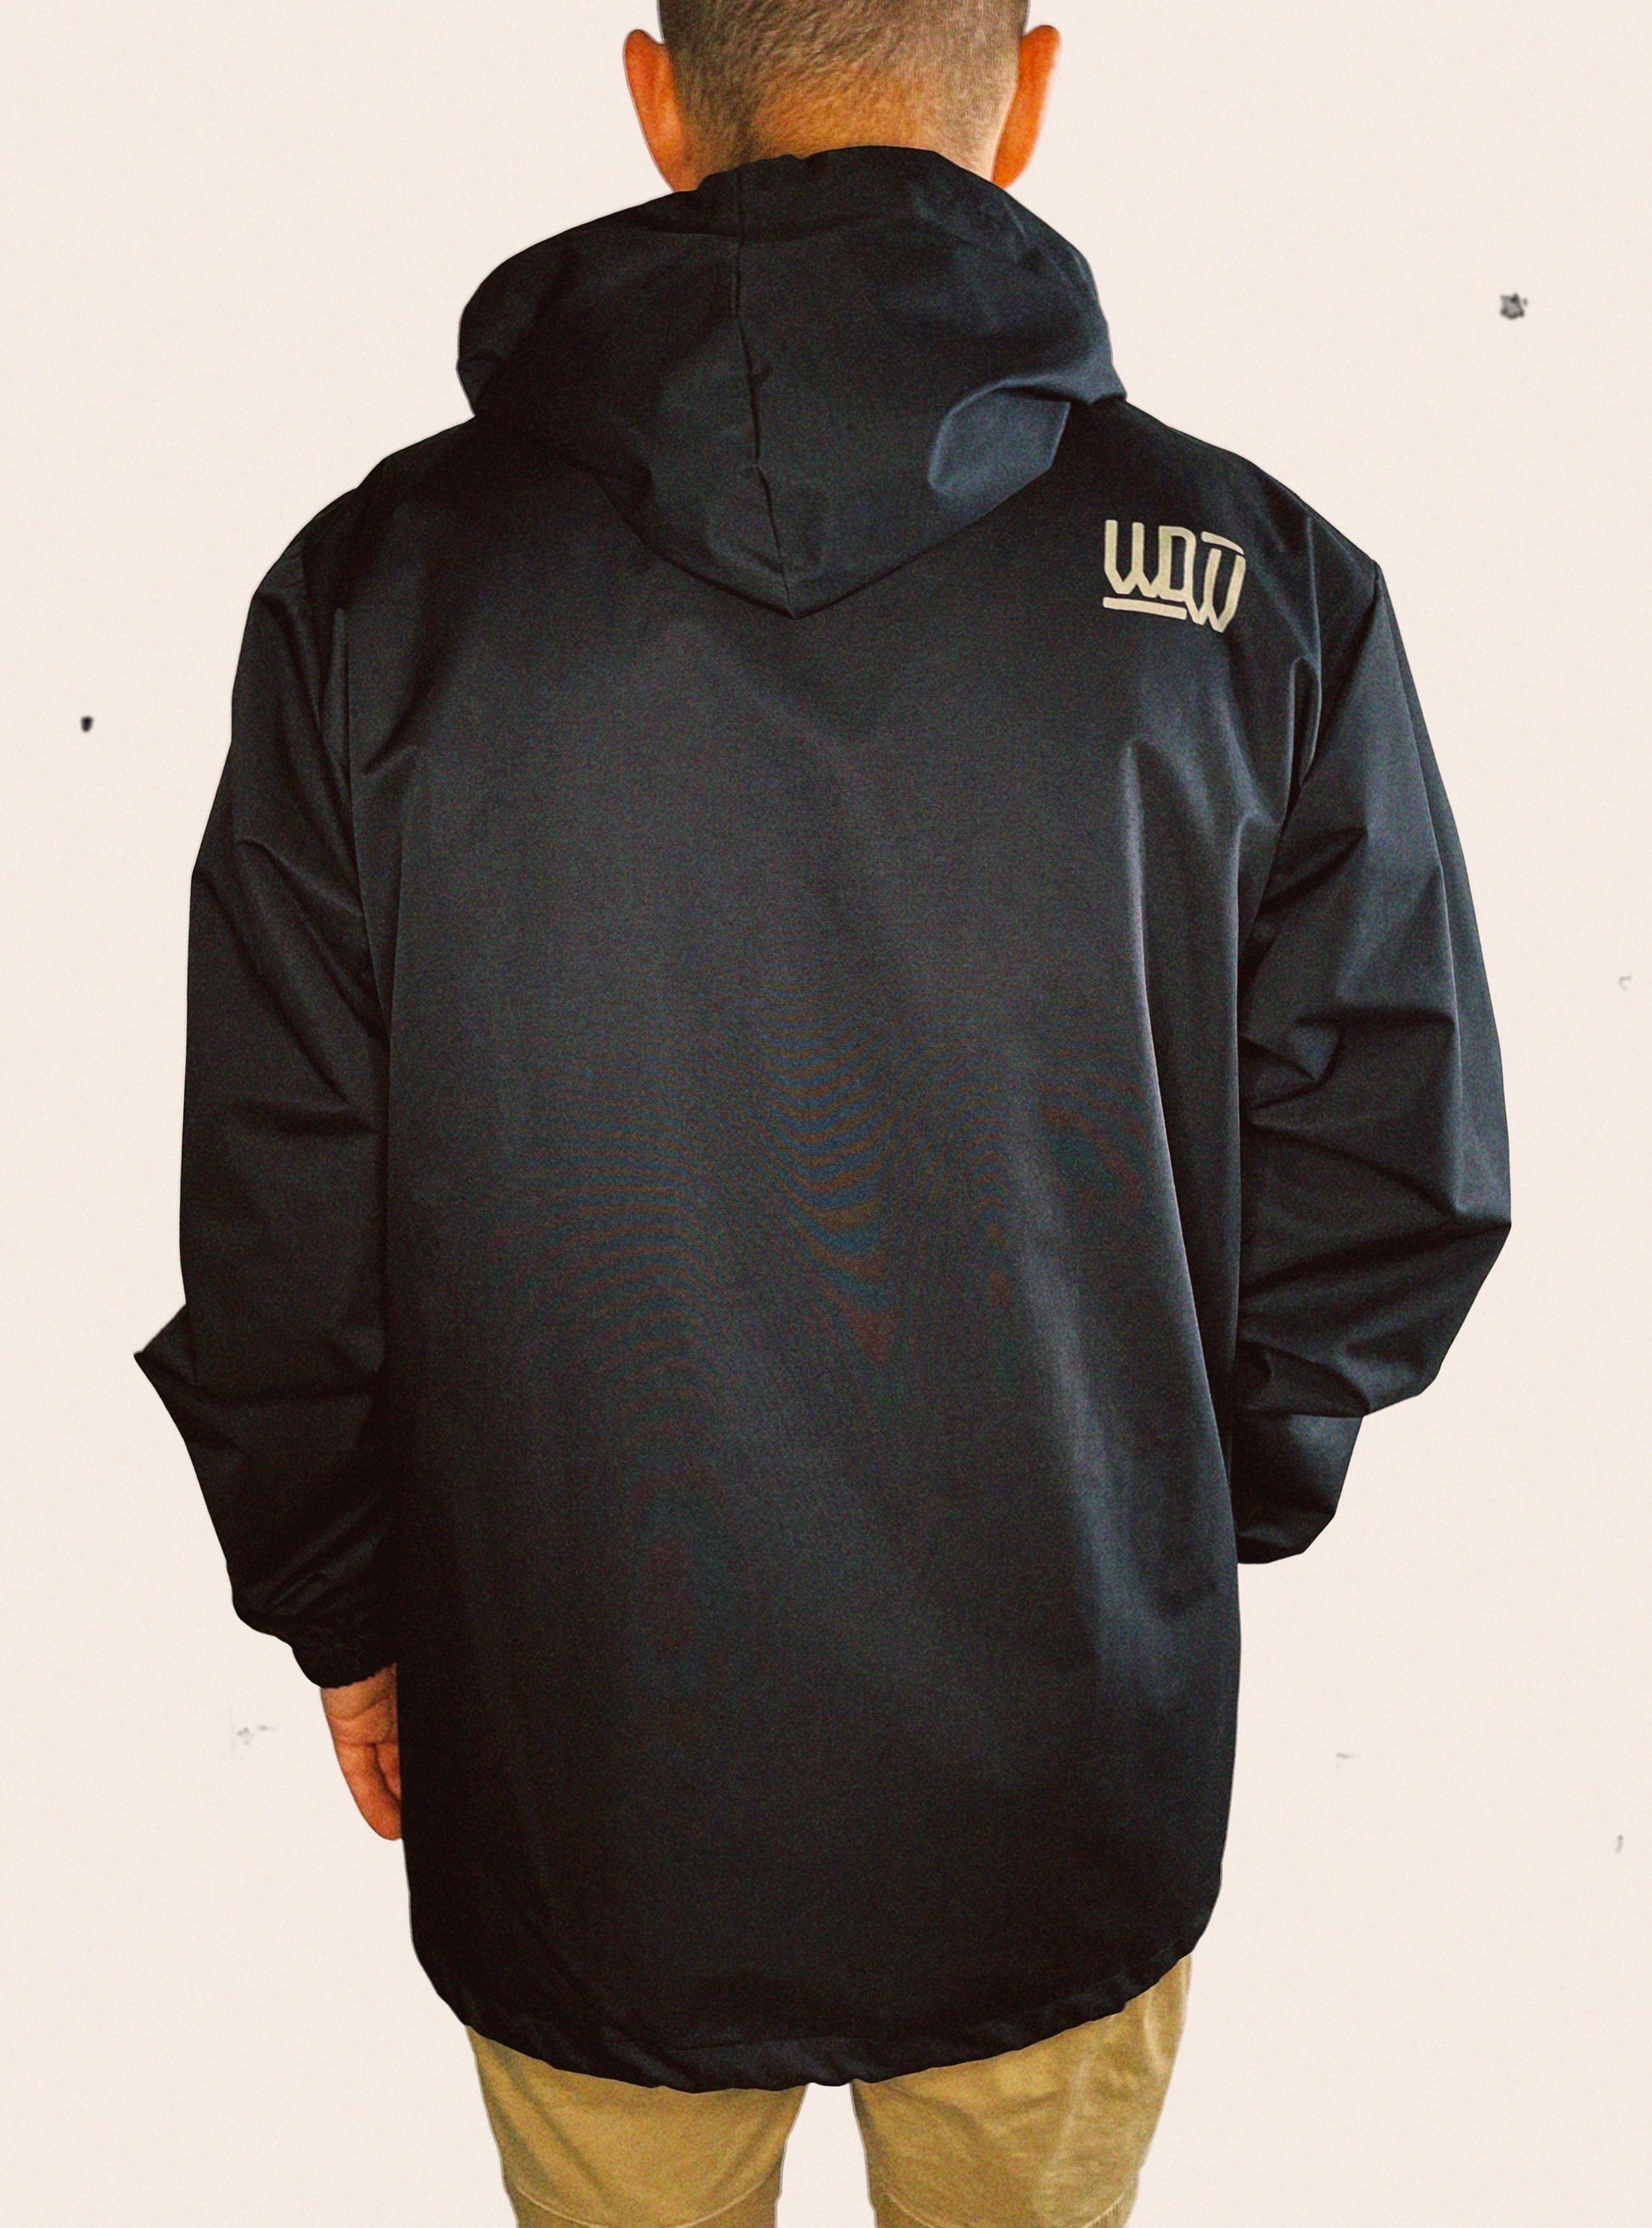 Black Independent Trading Company hooded shell jacket with gold snap buttons